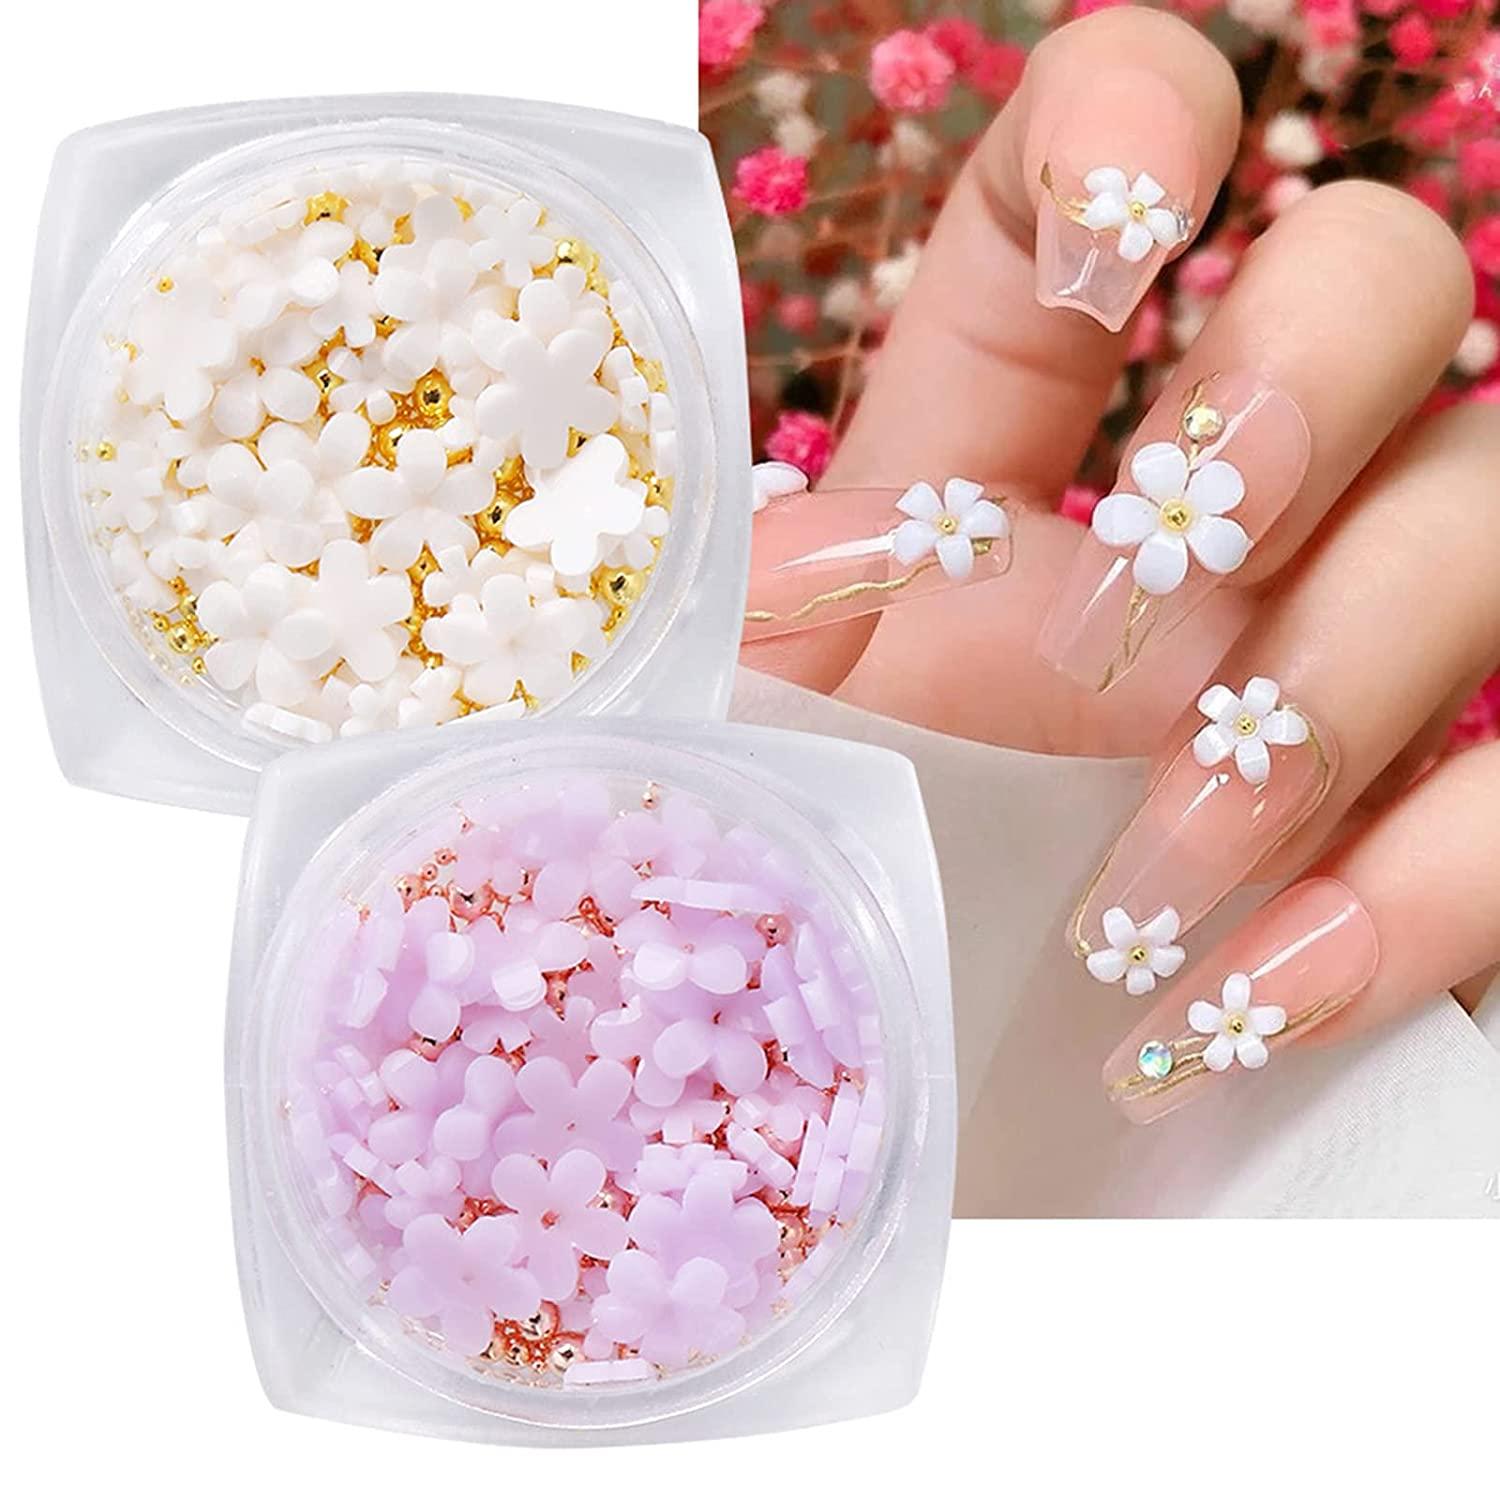 6 Boxes 3D Flower Nail Art Charms Light Change Nail Decals for Acrylic Nail Art Accessories with Pearl Golden Caviar Beads Glitter Supplies Stud Design Jewelry Women DIY Decoration Tips Flower(Lignt